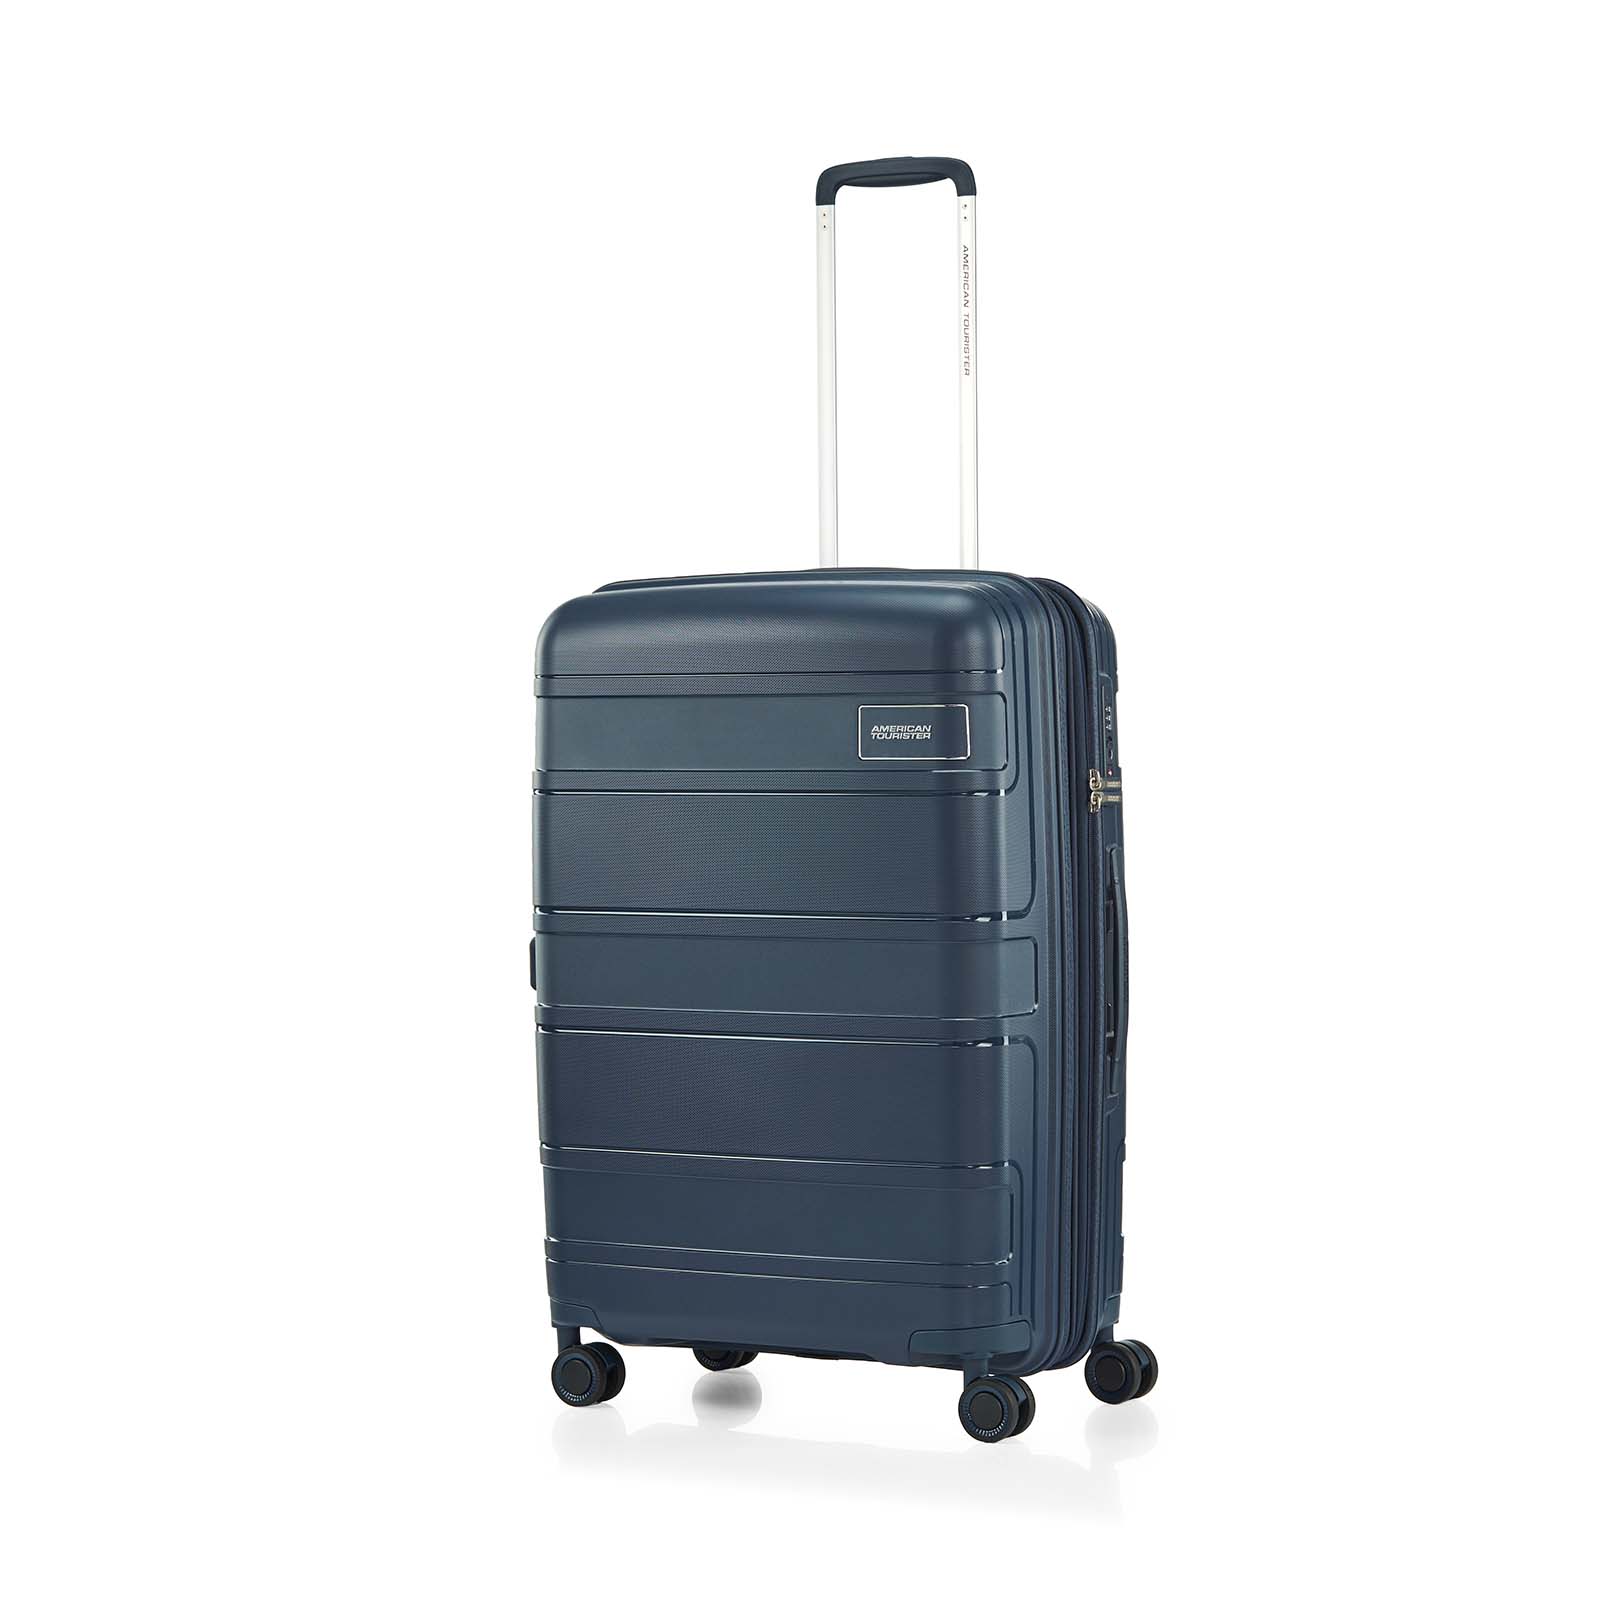 American-Tourister-Light-Max-69cm-Suitcase-Navy-Front-Angle